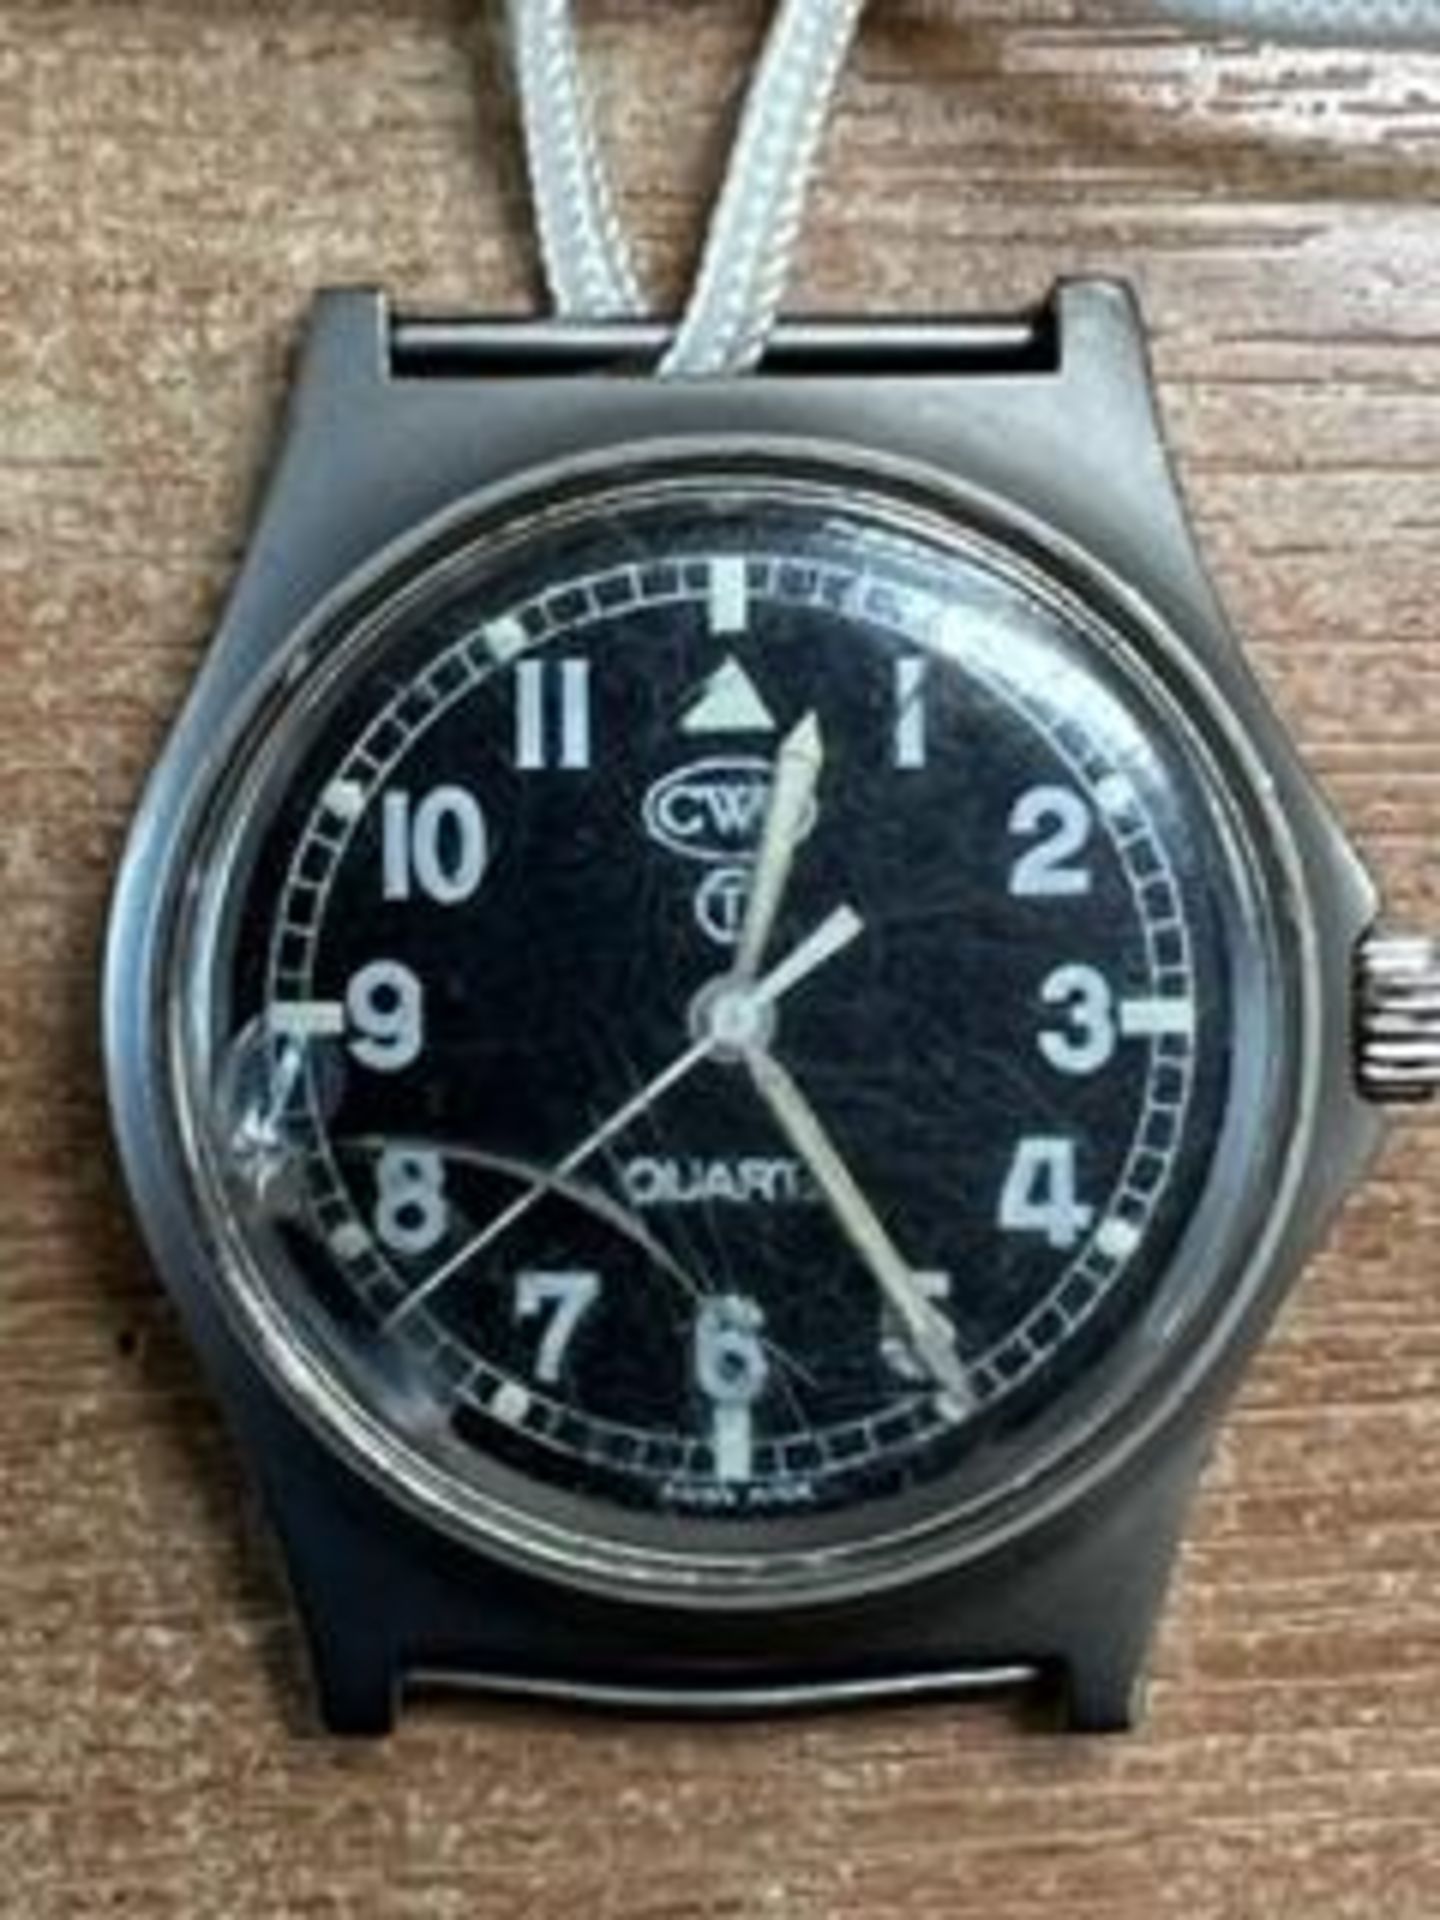 CWC 0552 R. NAVY ISSUE SERVICE WATCH NATO MARKS DATE 1989